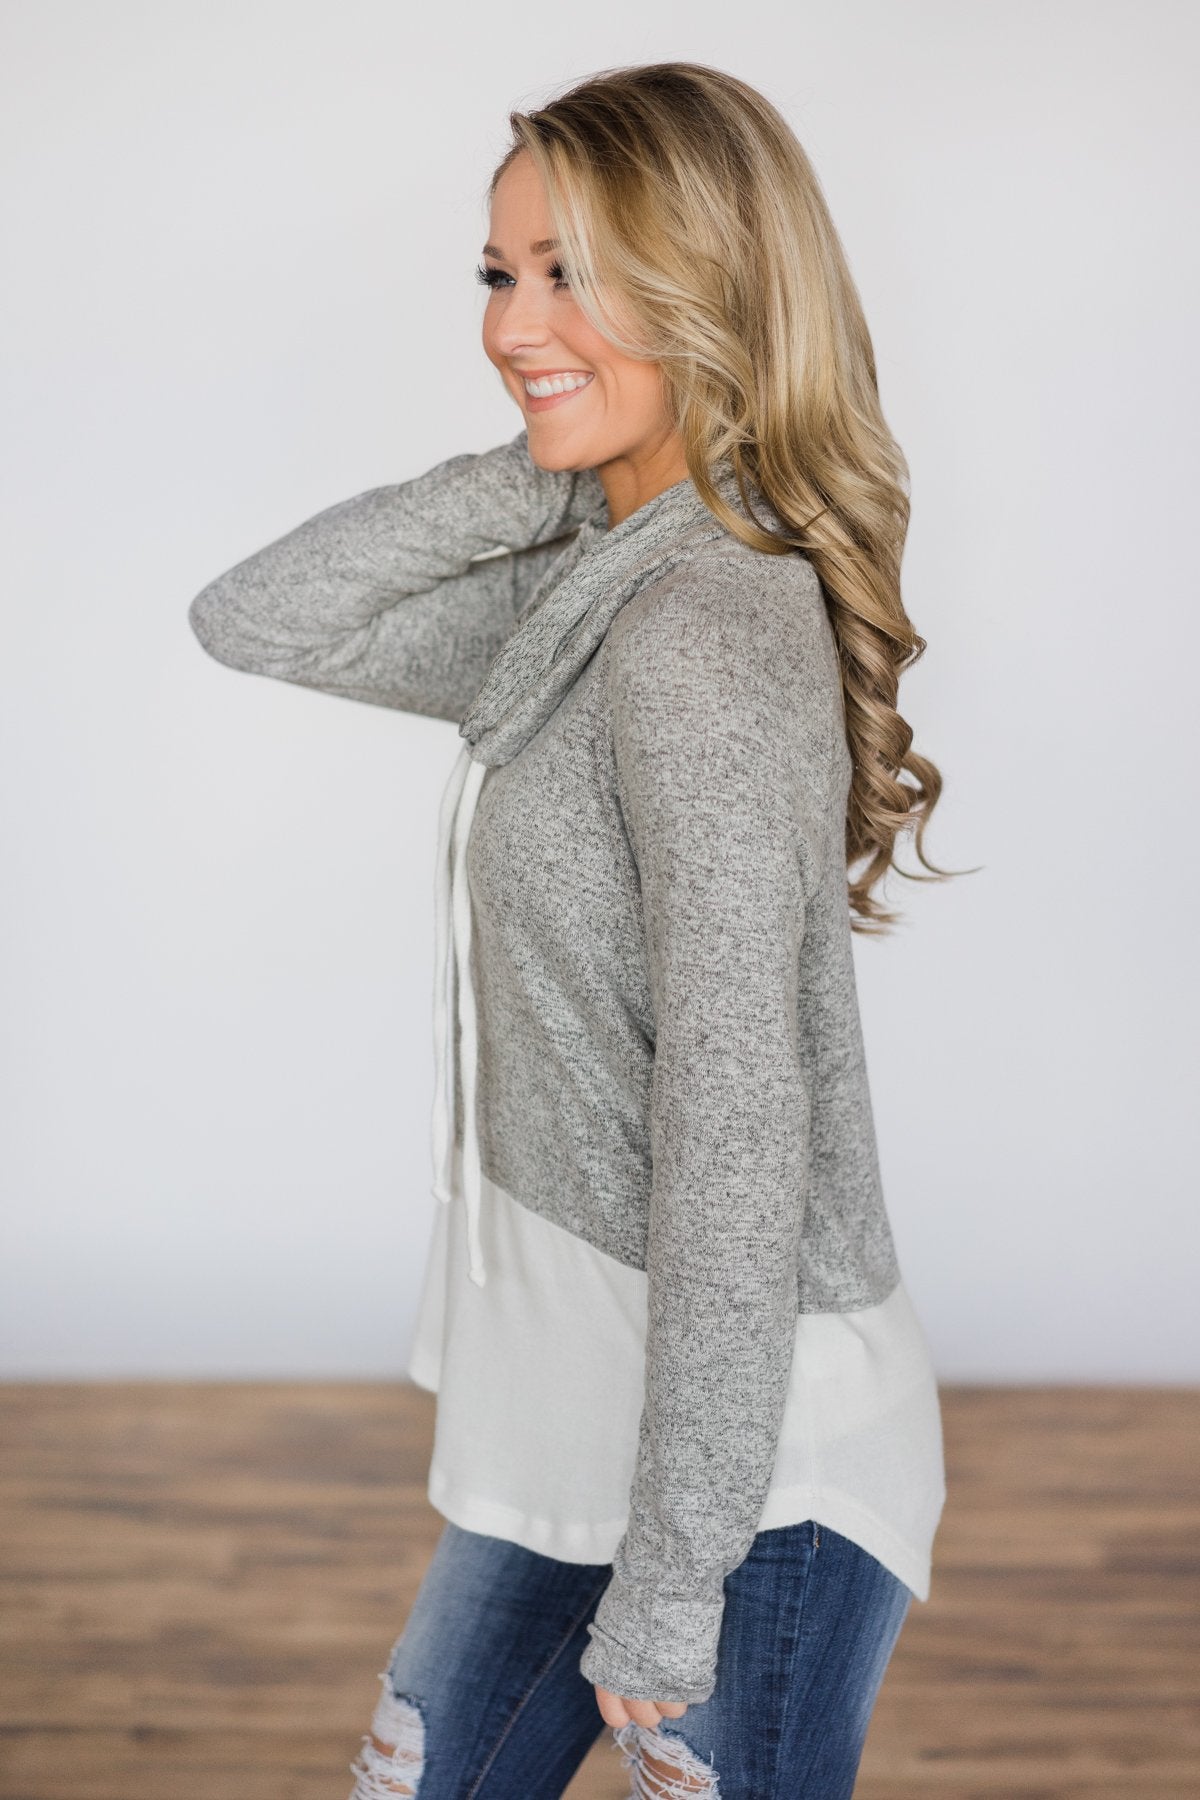 My Favorite Cowl Neck Top ~ Grey & White